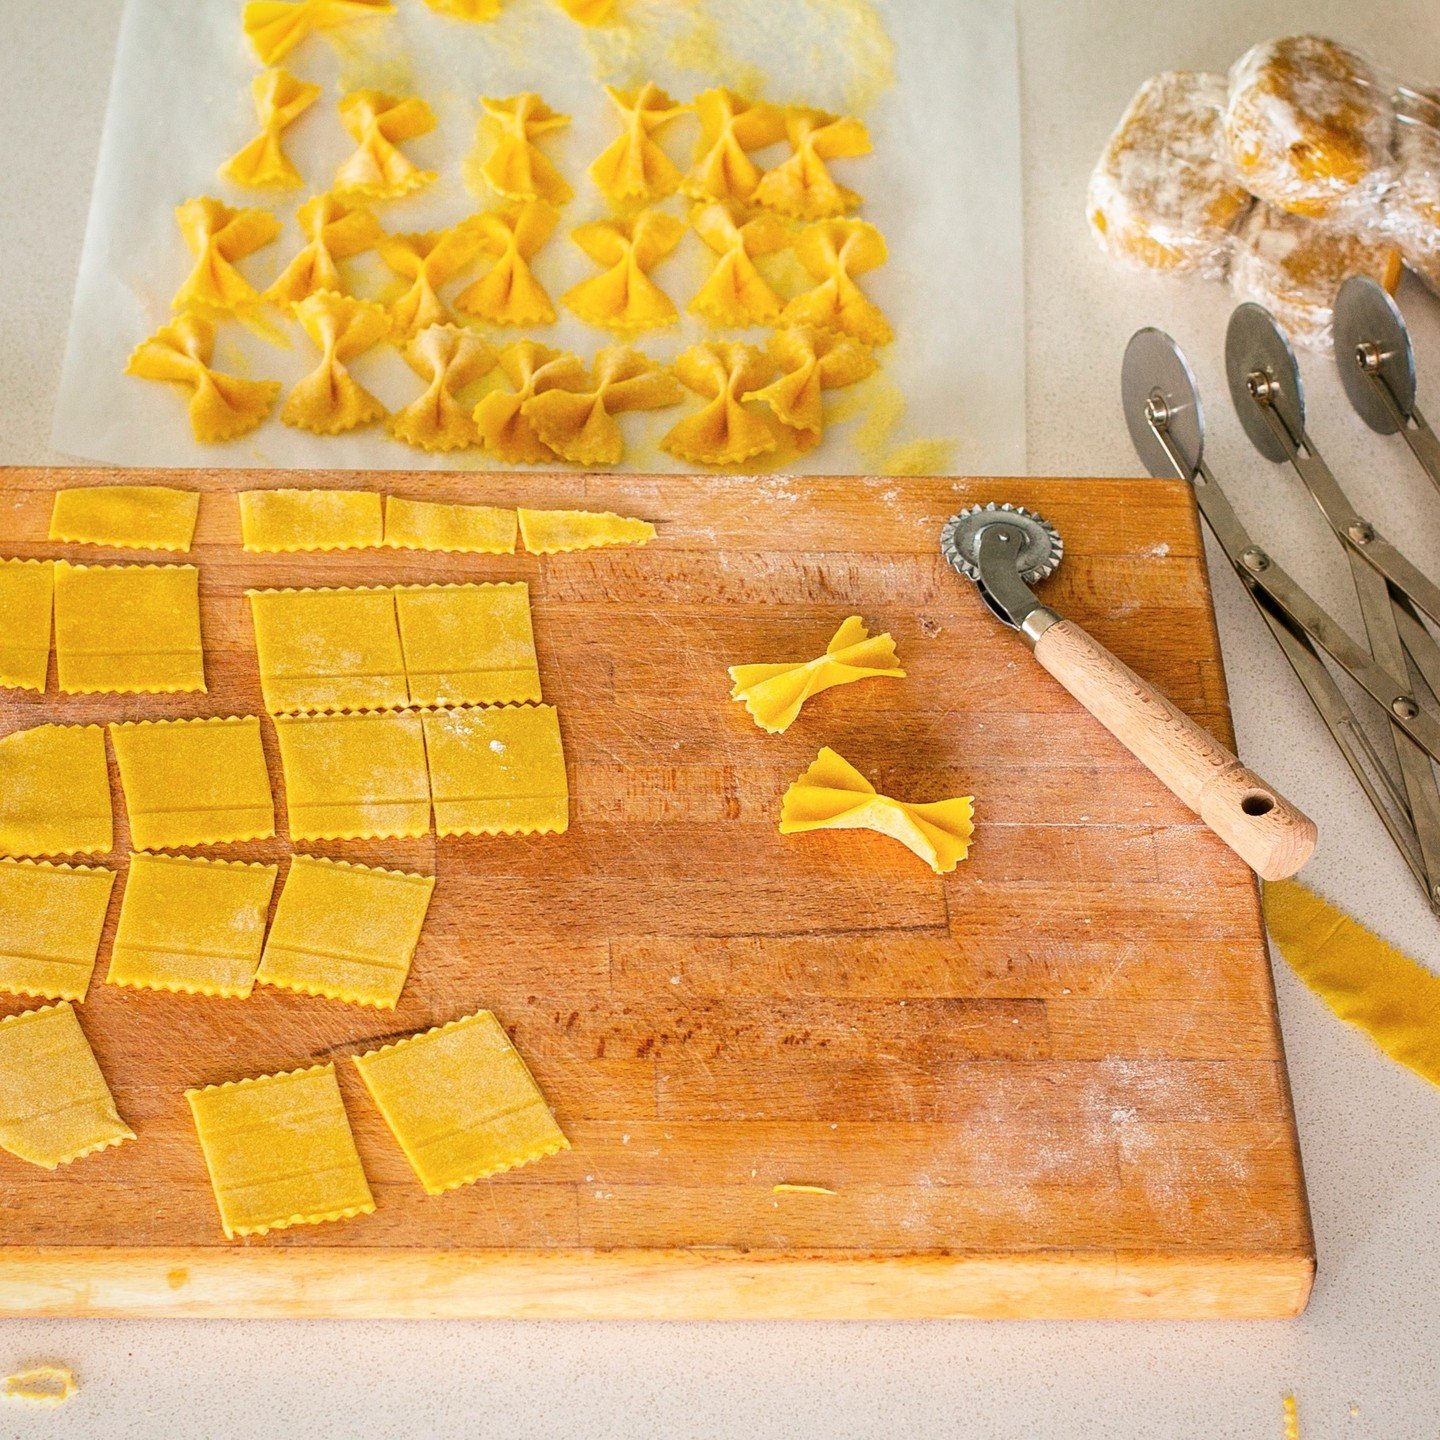 Hand made pasta class at Mindful Cuisine - Saturday April 13. Sign up NOW! Pastas dishes for spring! 6 spots left! Follow link for details and to sign up: https://www.mindfulcuisine.com/calendar/2024/4/13/pasta-by-hand-spring #cookingclassparkcitly #